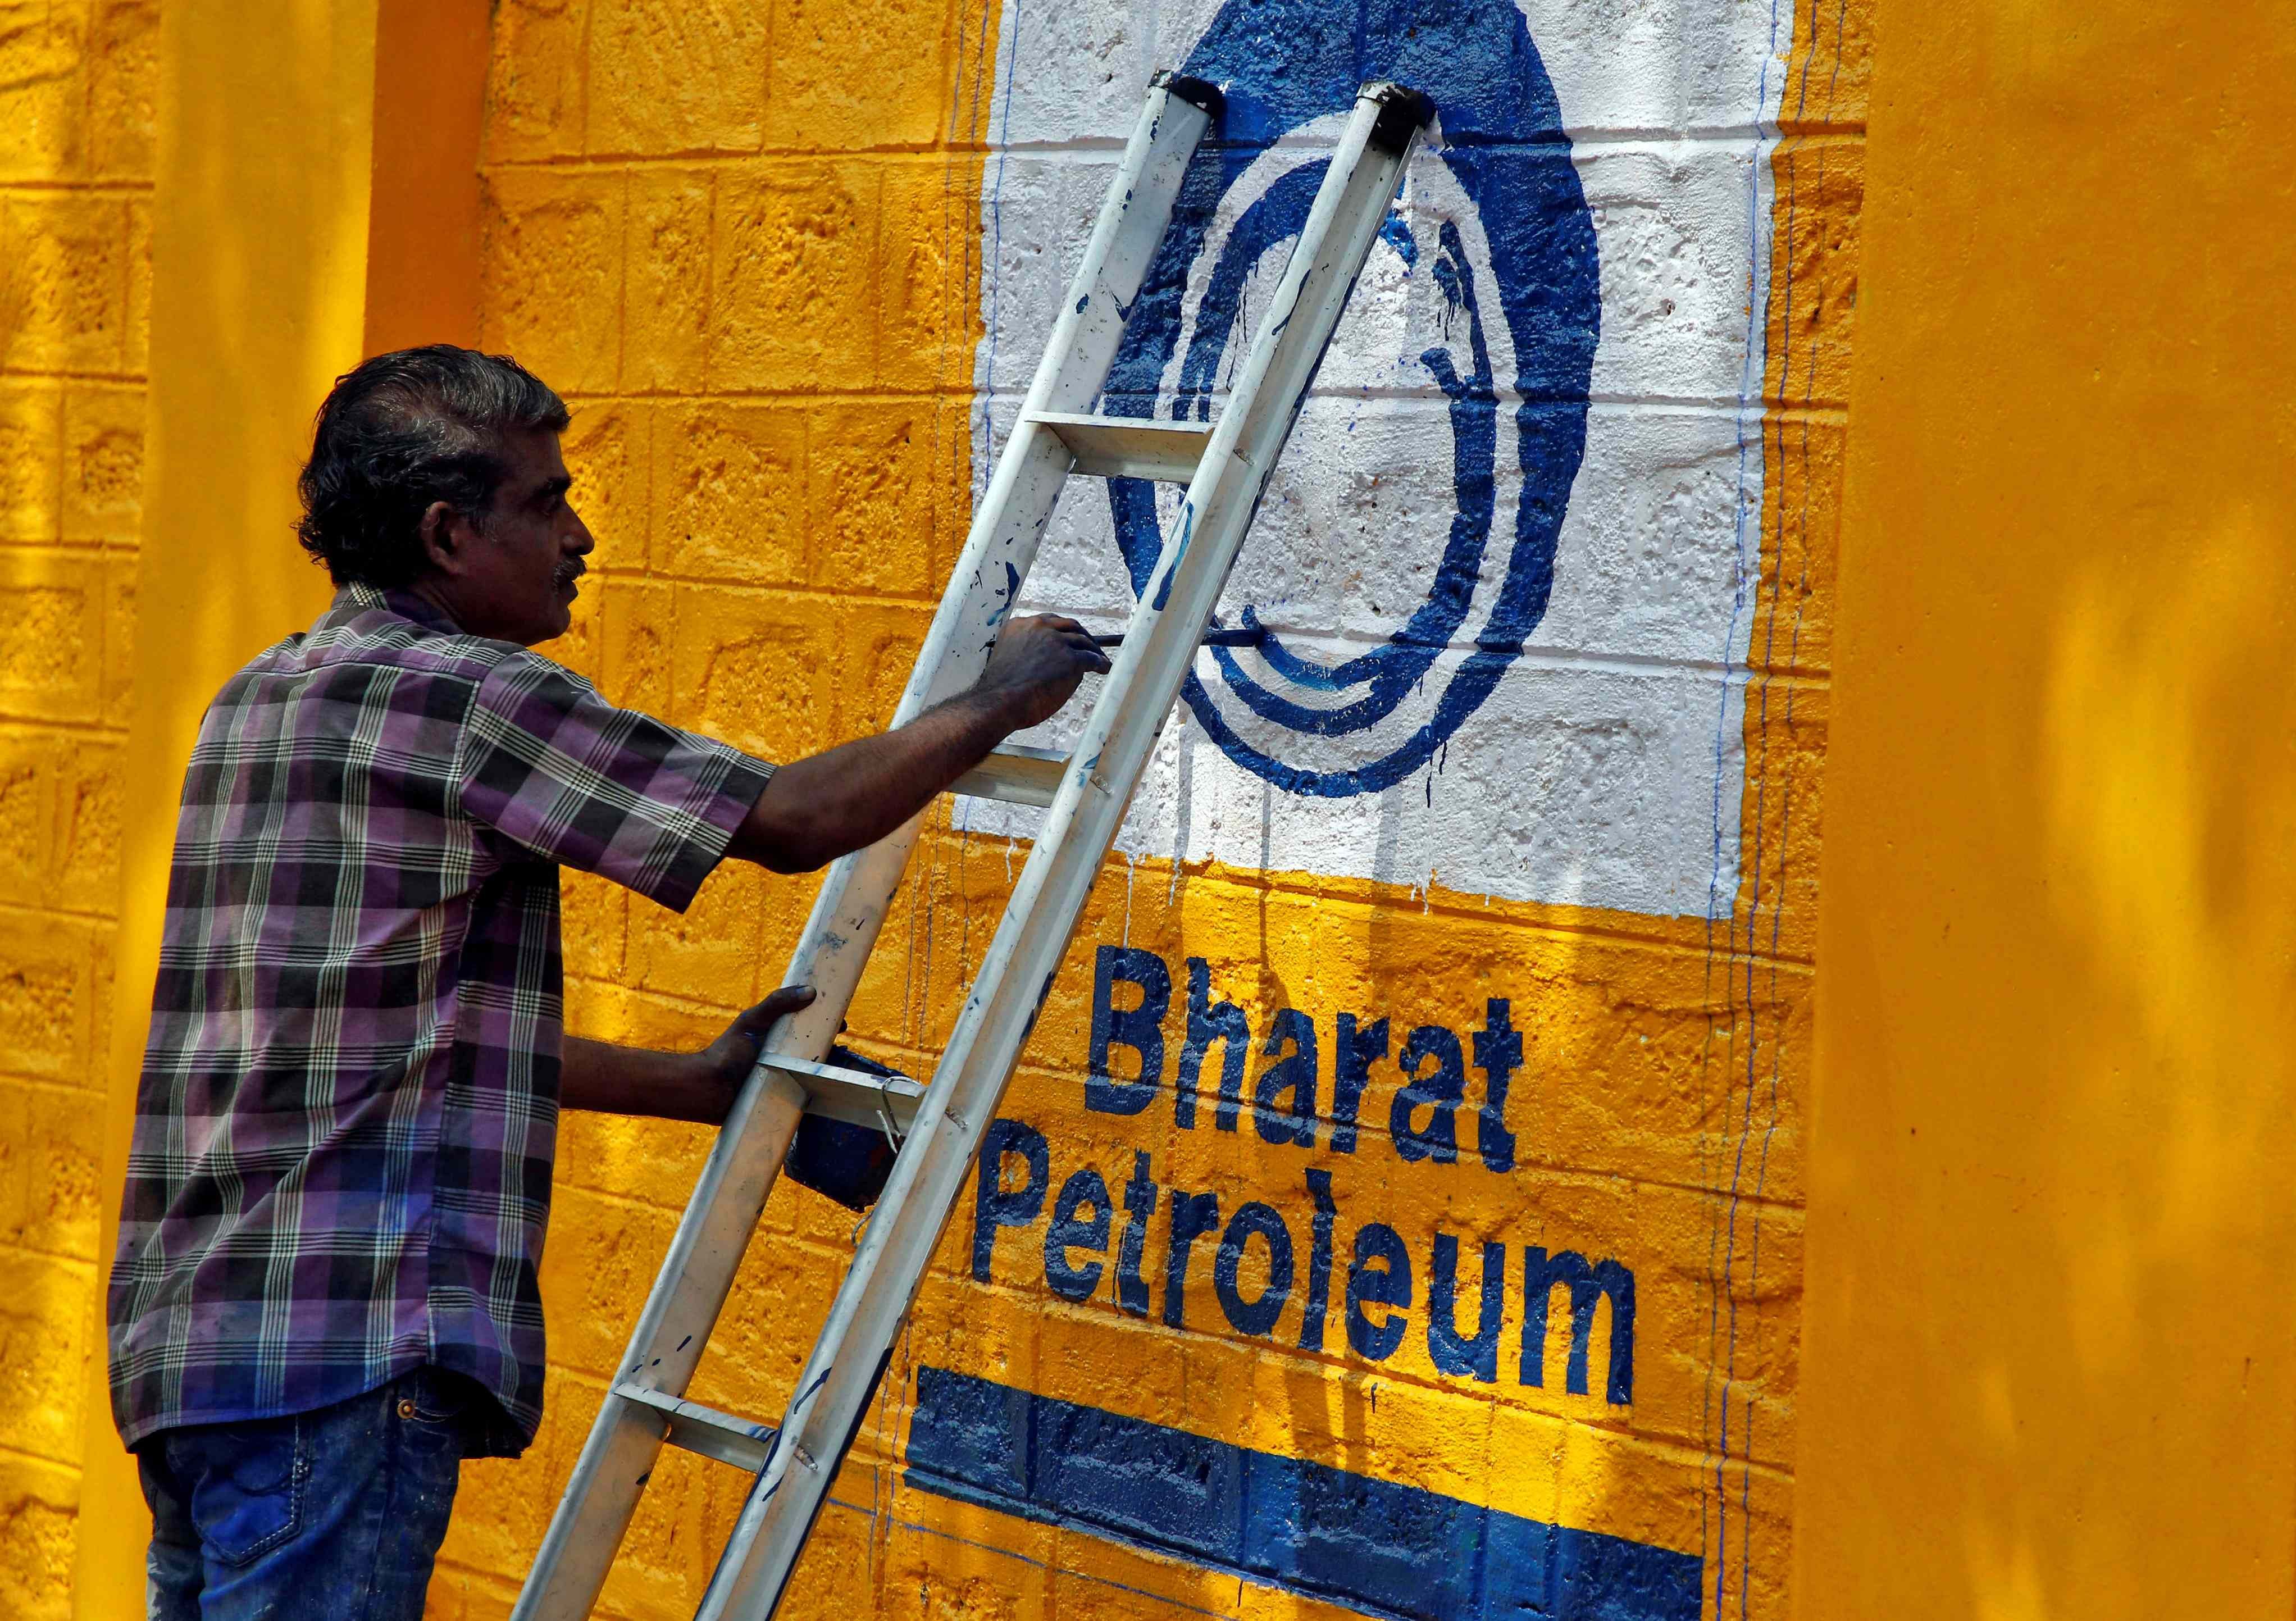 Petroleum major Bharat Petroleum said that one of its outlets on the Agra-Mumbai highway in Guna district of Madhya Pradesh is providing free meals to migrant labourers who are travelling back to their homes. (Reuters photo)